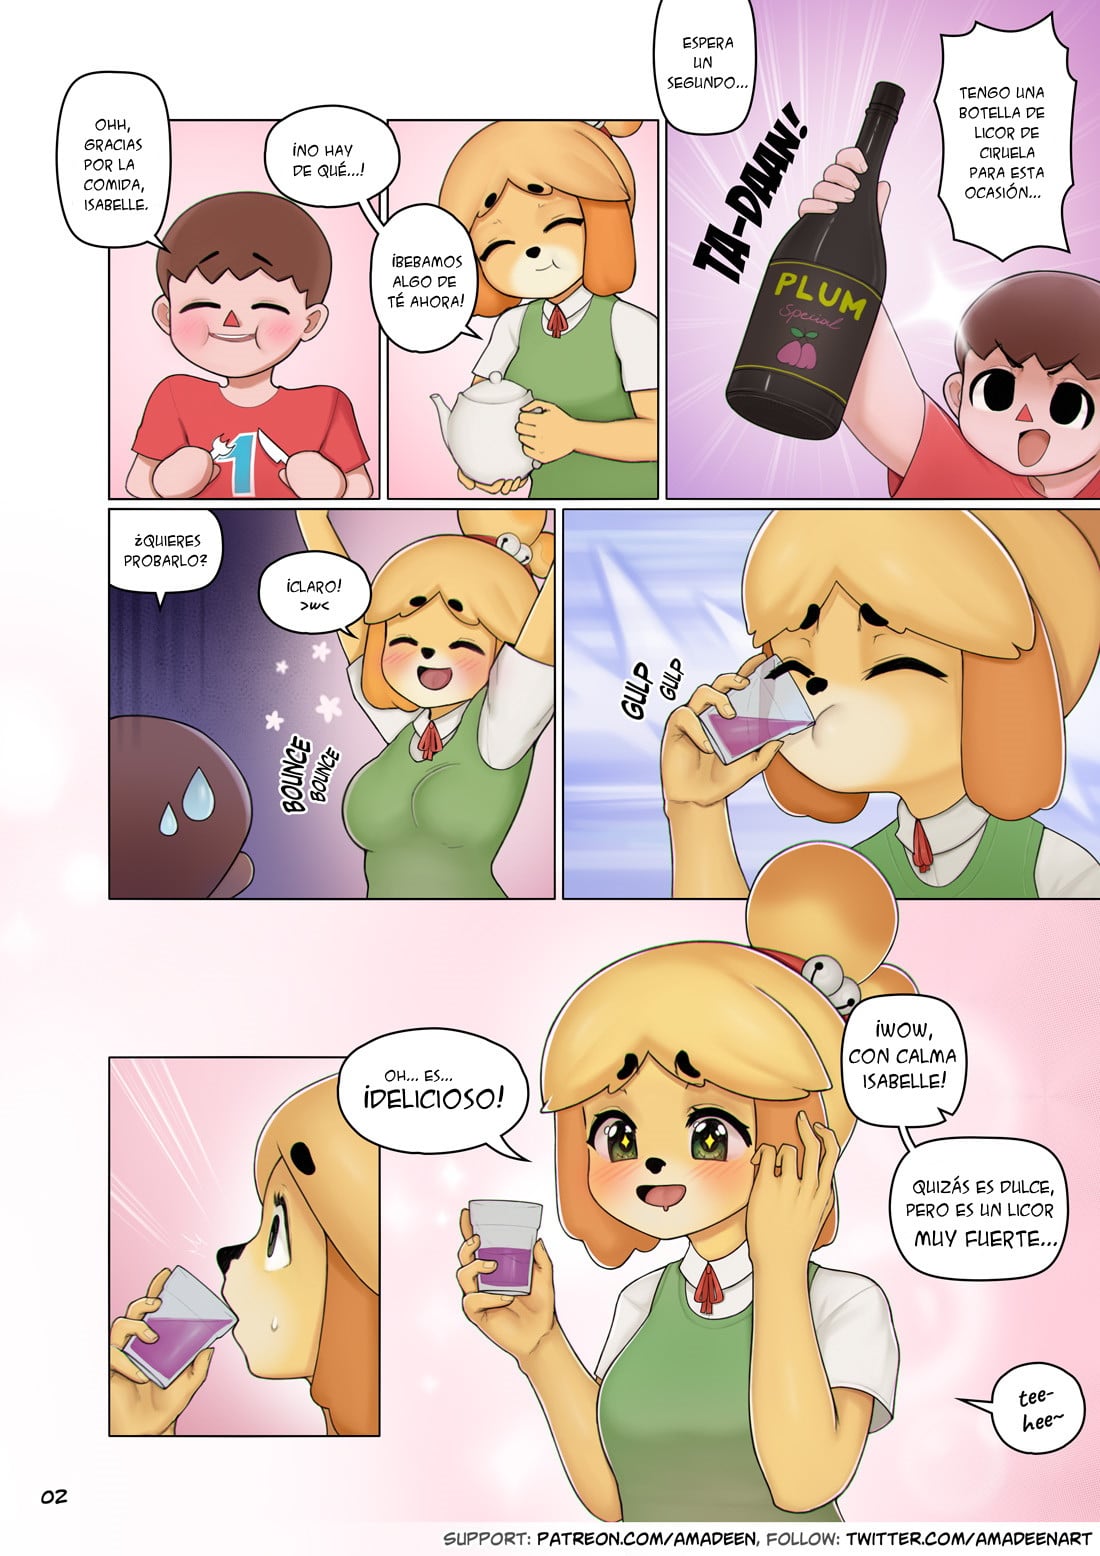 Isabelle’s Lunch Incident - 2